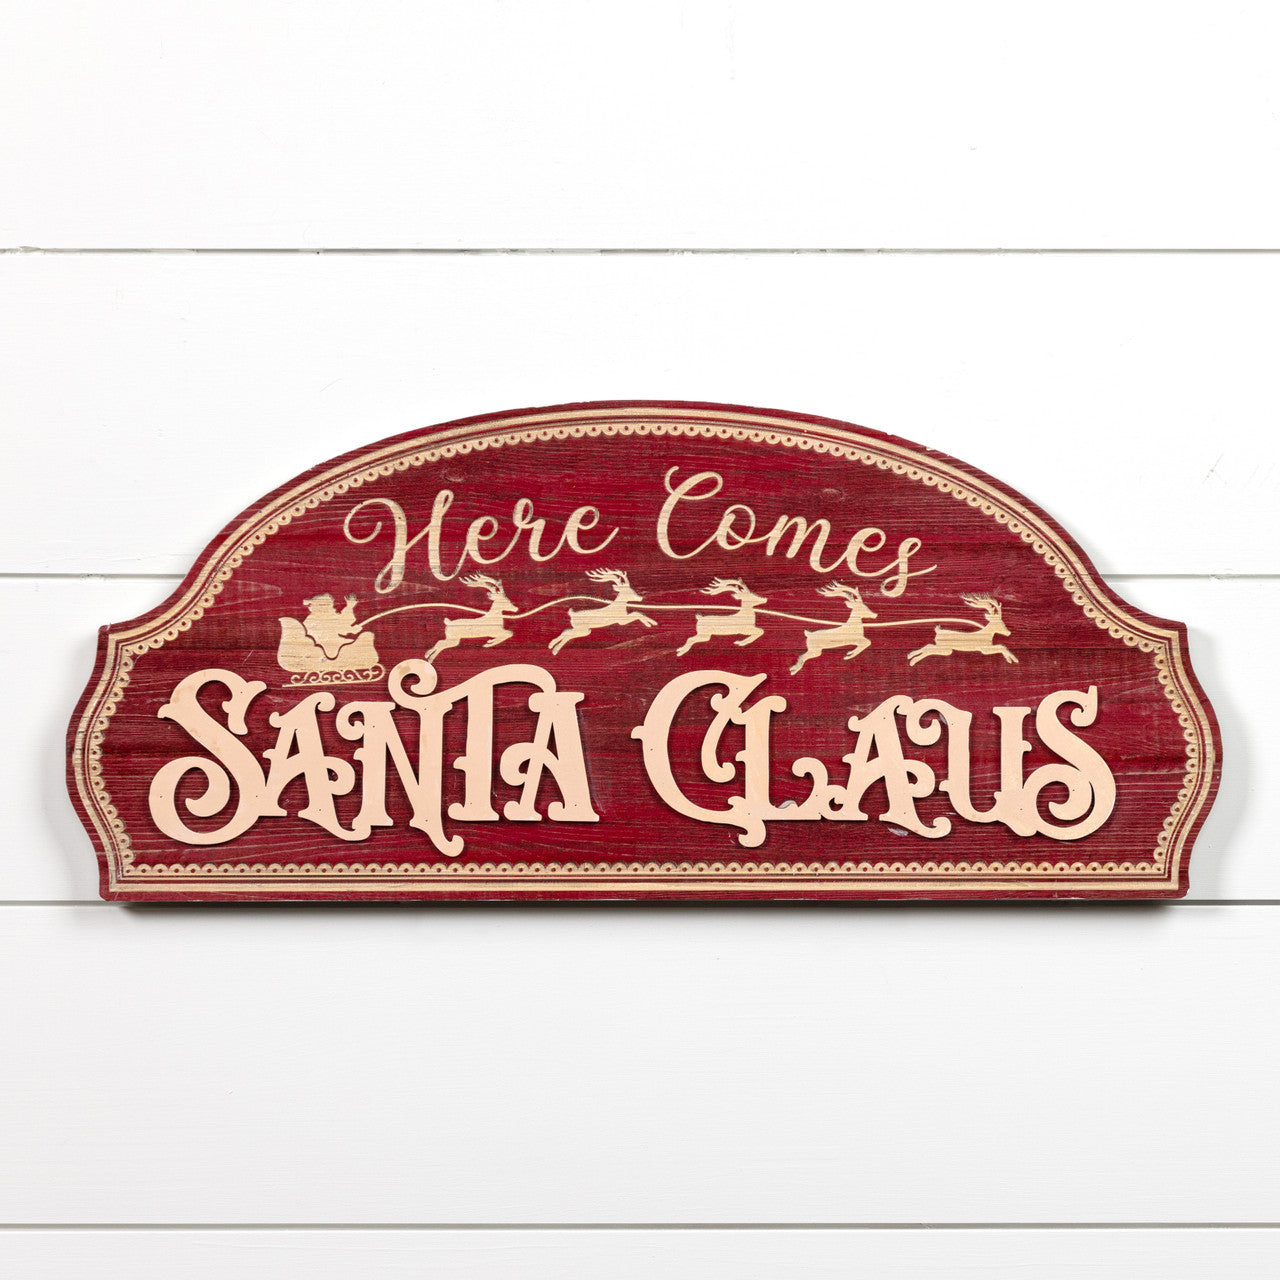 Here Come Santa Claus Sign